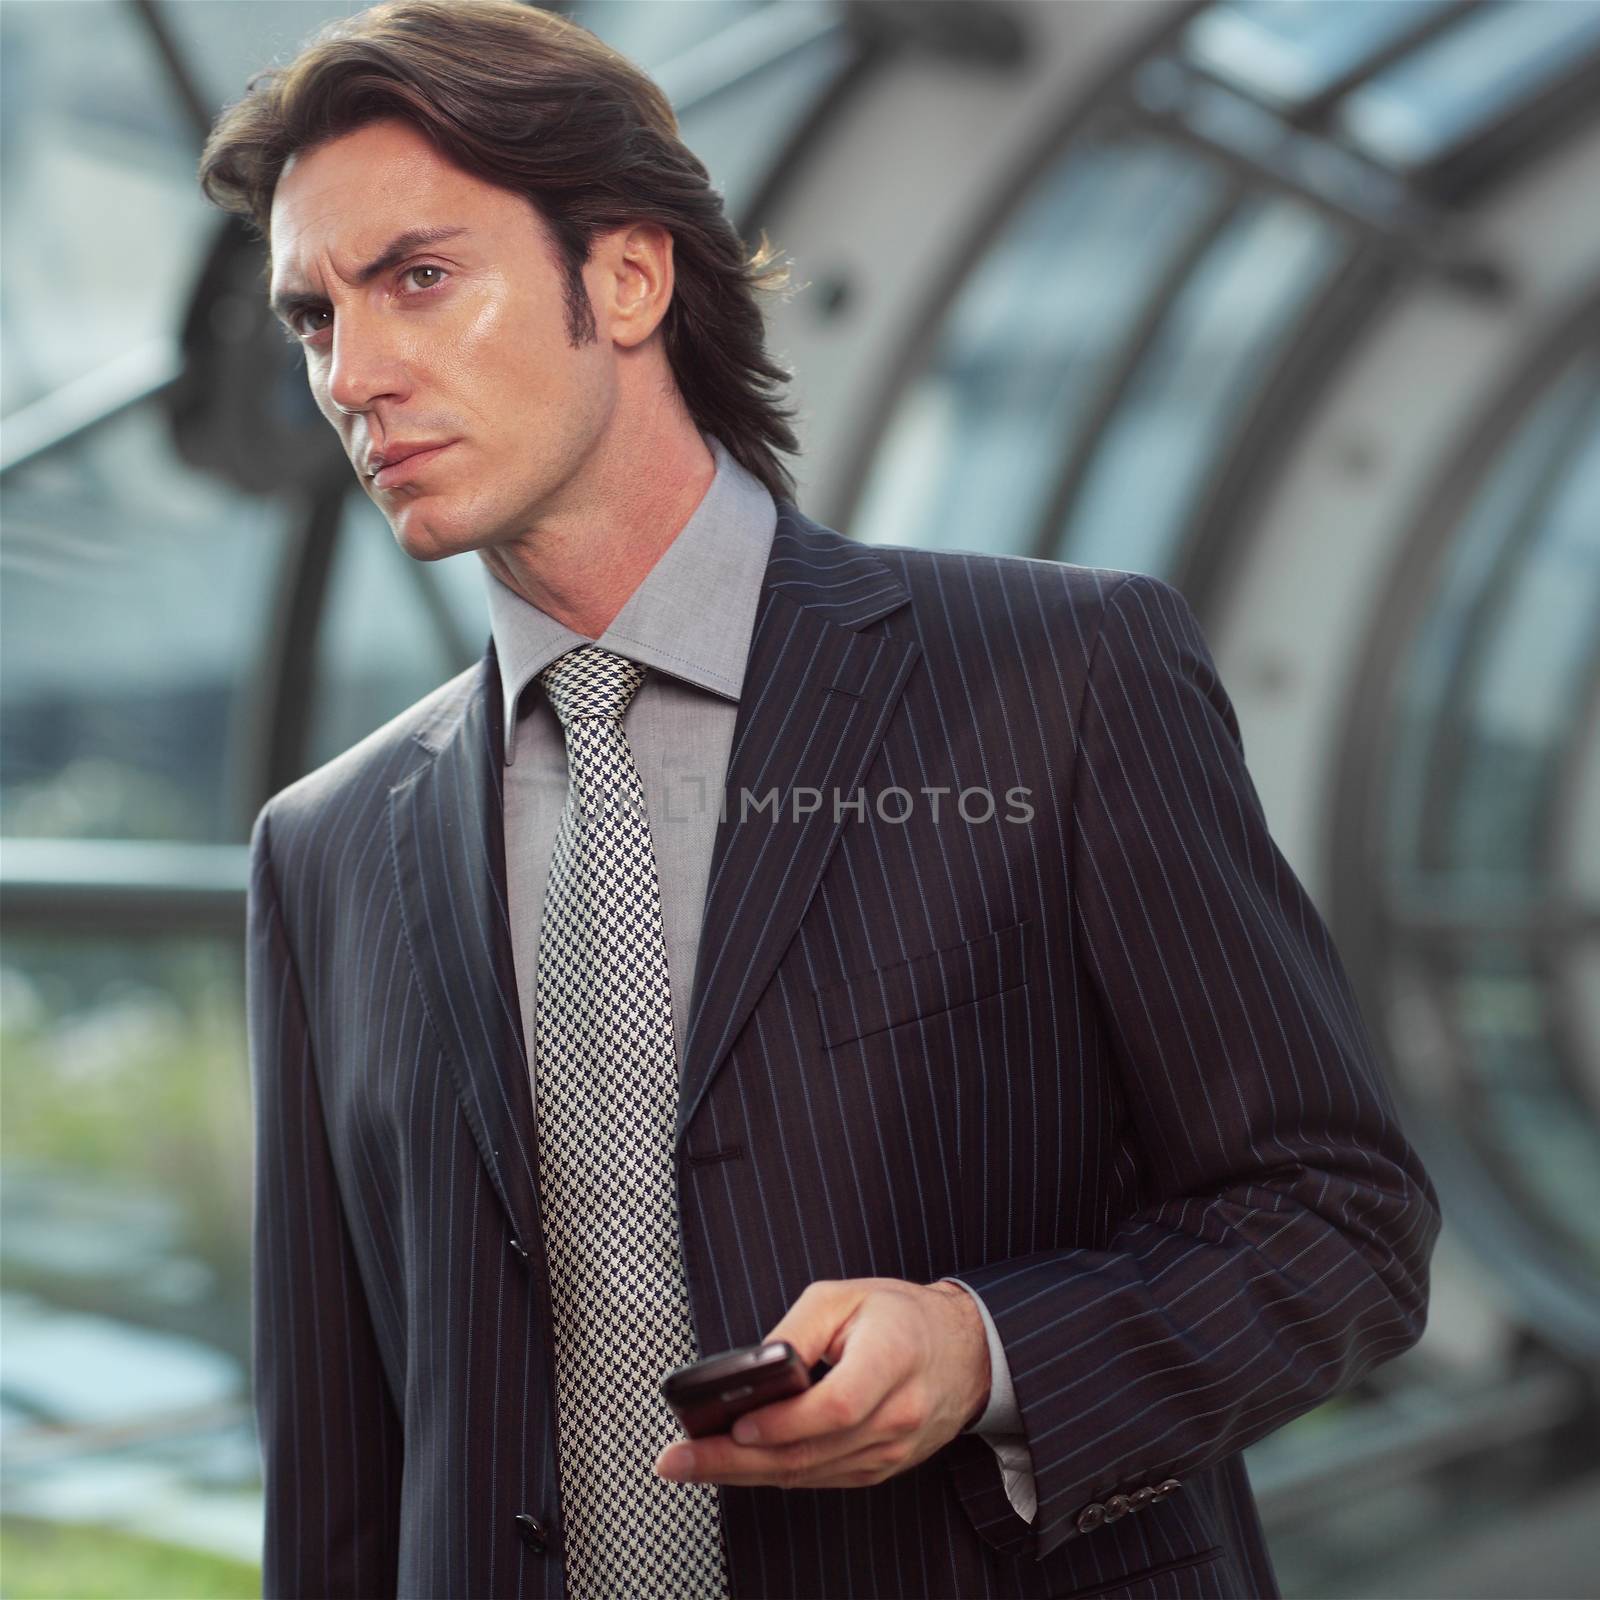 Businessman using a mobile phone 